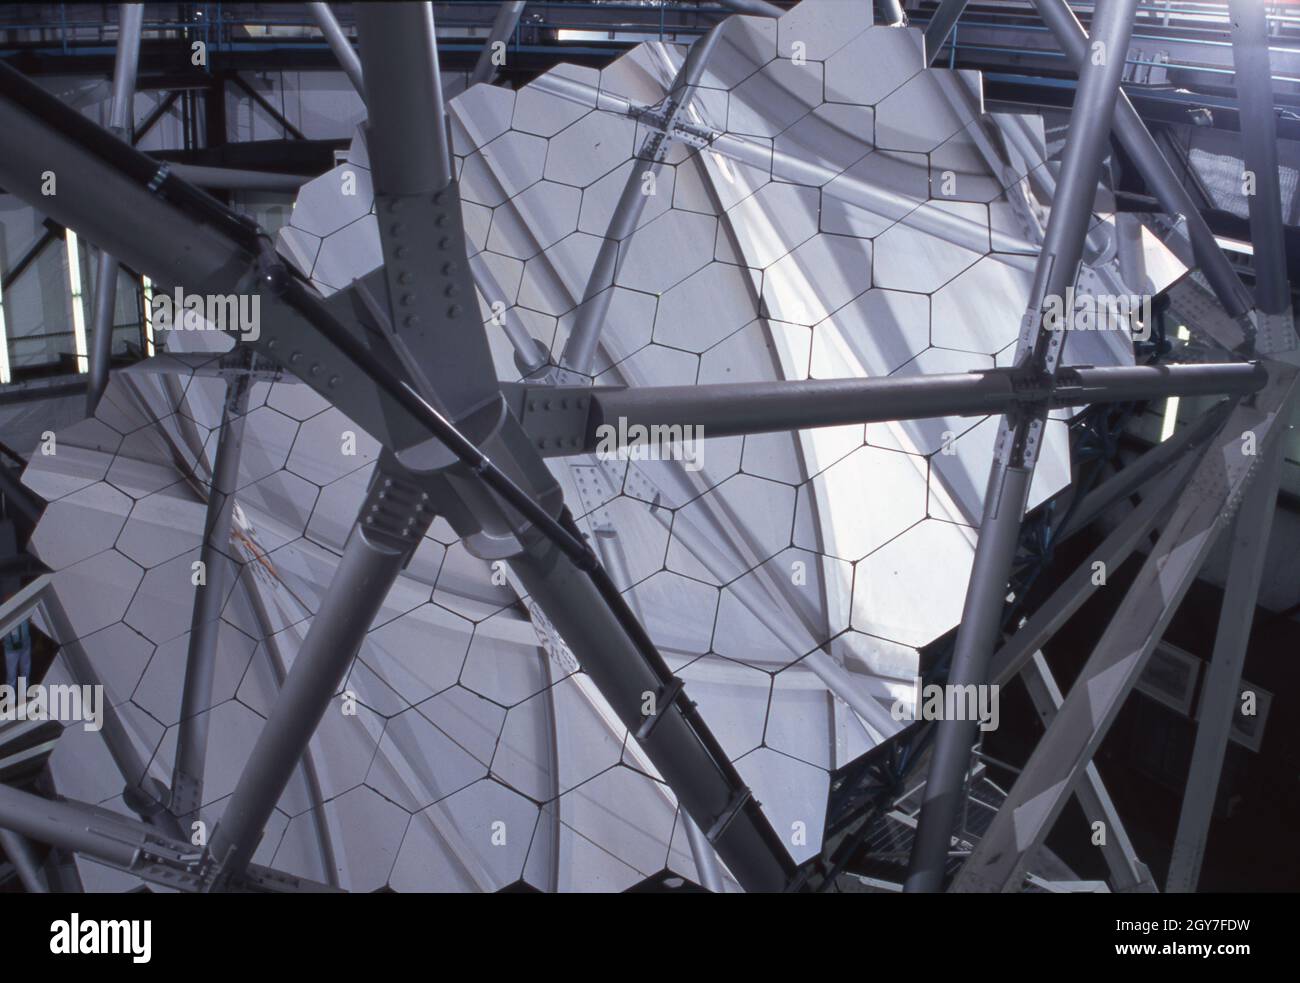 Jeff Davis County Texas, USA, October 1997: Portion of mirror of the 432-inch Hobby-Eberly telescope at the University of Texas's McDonald Observatory Stock Photo